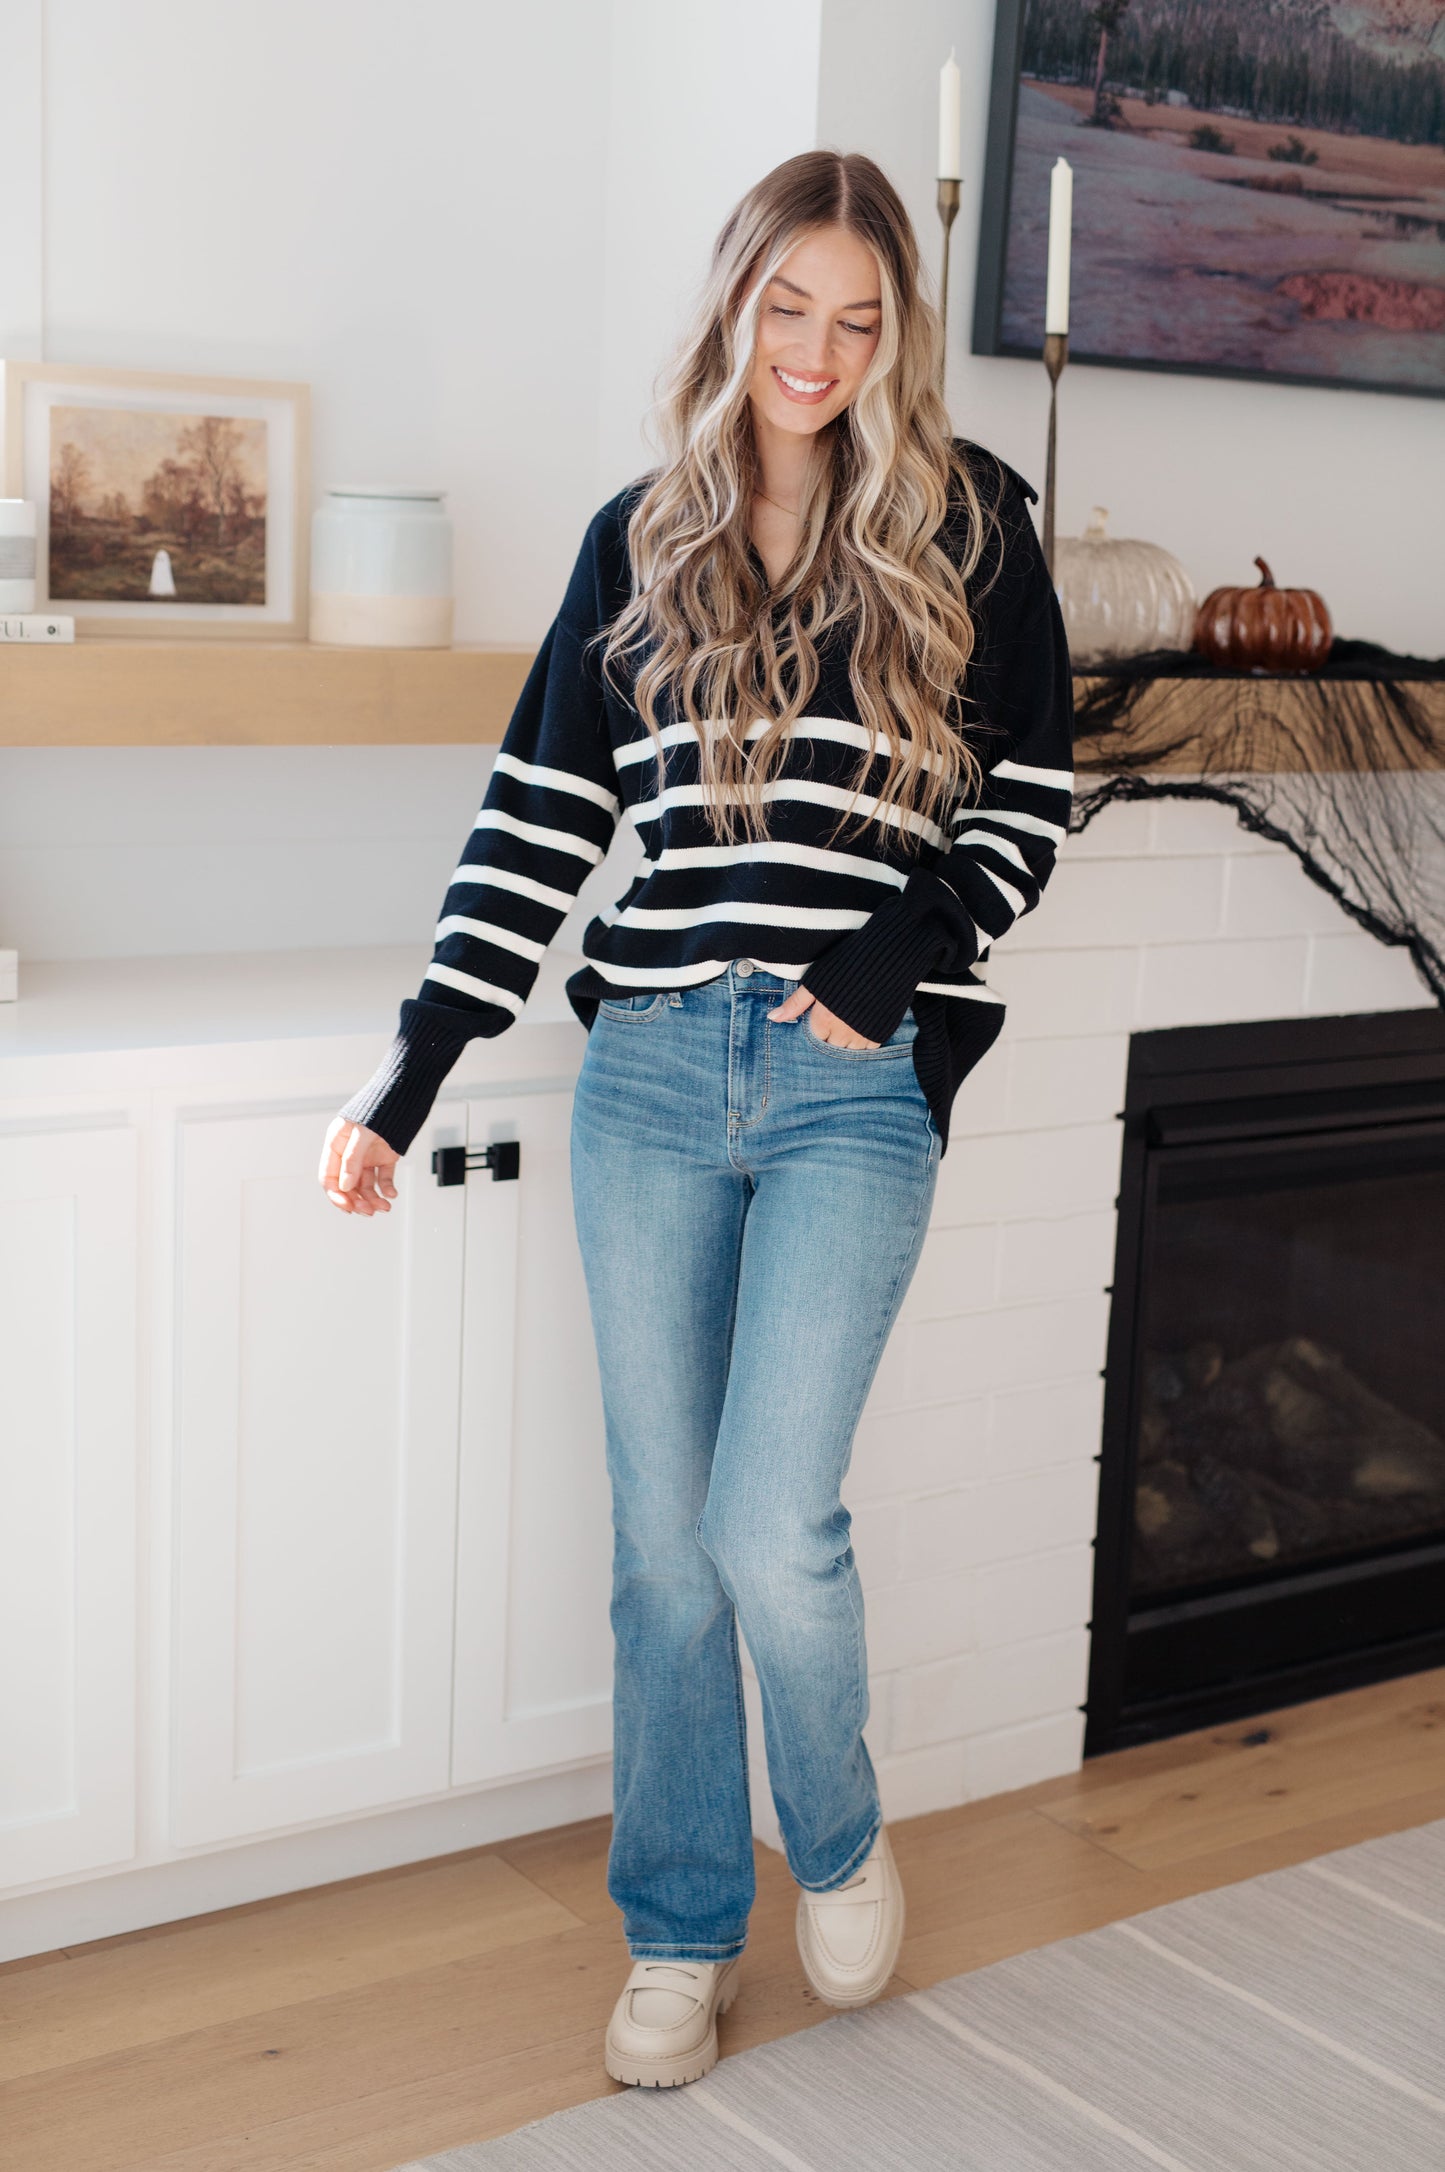 From Here On Out Striped Sweater - Southern Divas Boutique